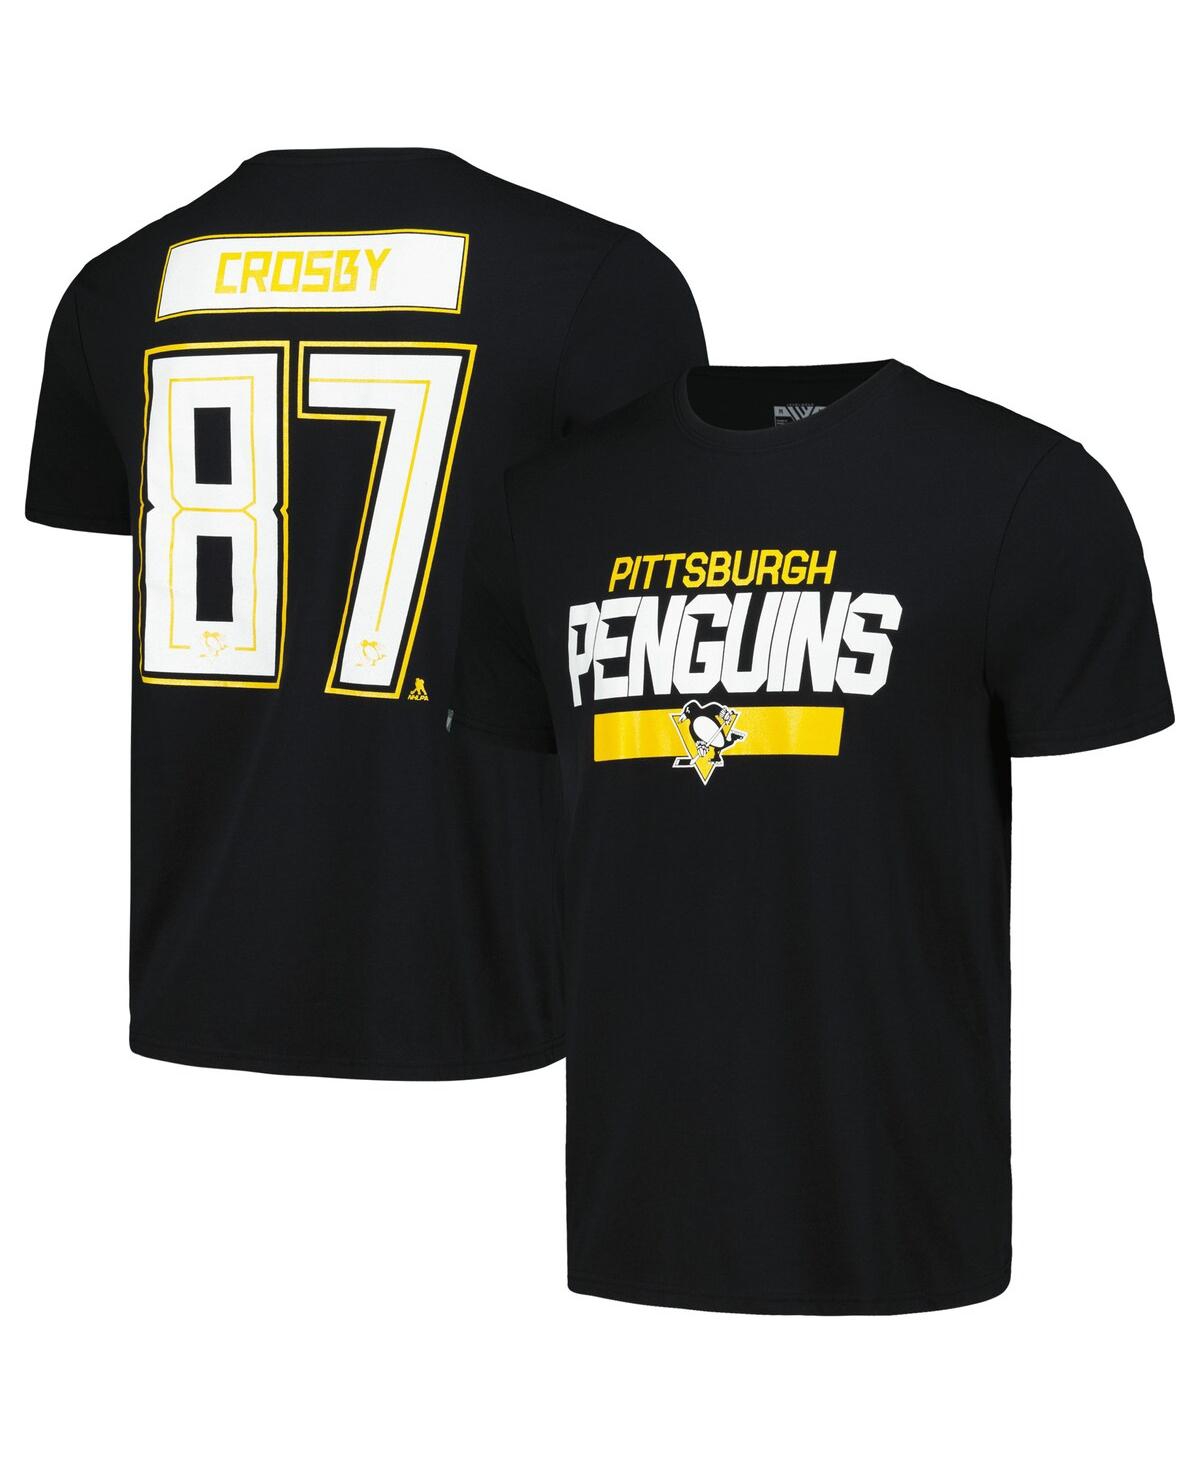 Men's LevelWear Sidney Crosby Black Pittsburgh Penguins Richmond Player Name and Number T-shirt - Black